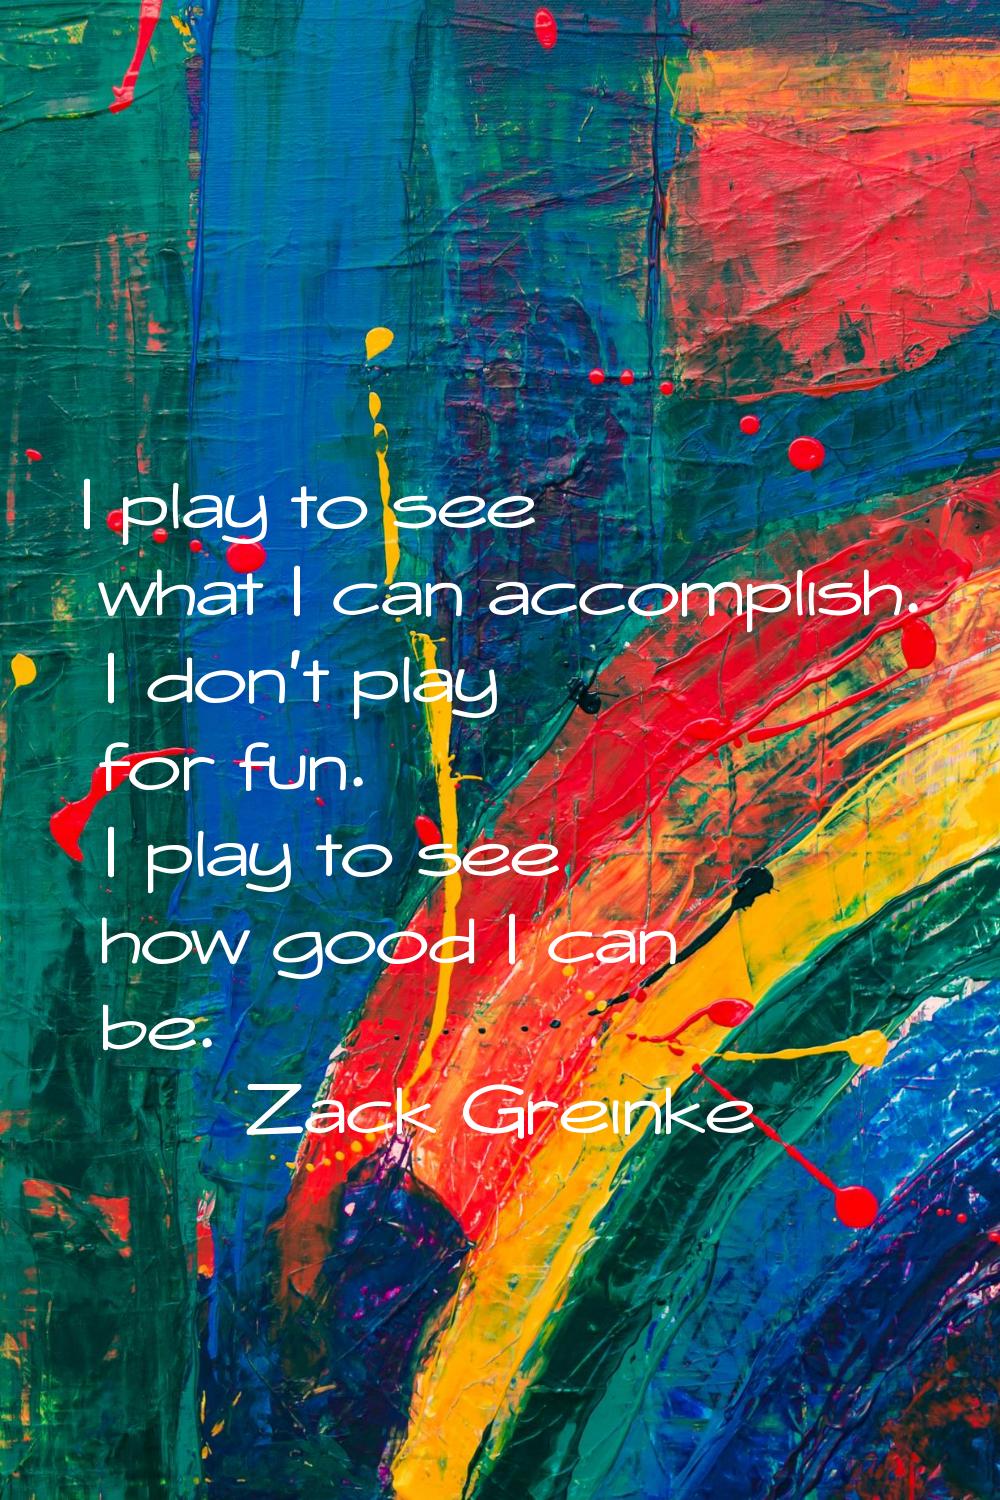 I play to see what I can accomplish. I don't play for fun. I play to see how good I can be.